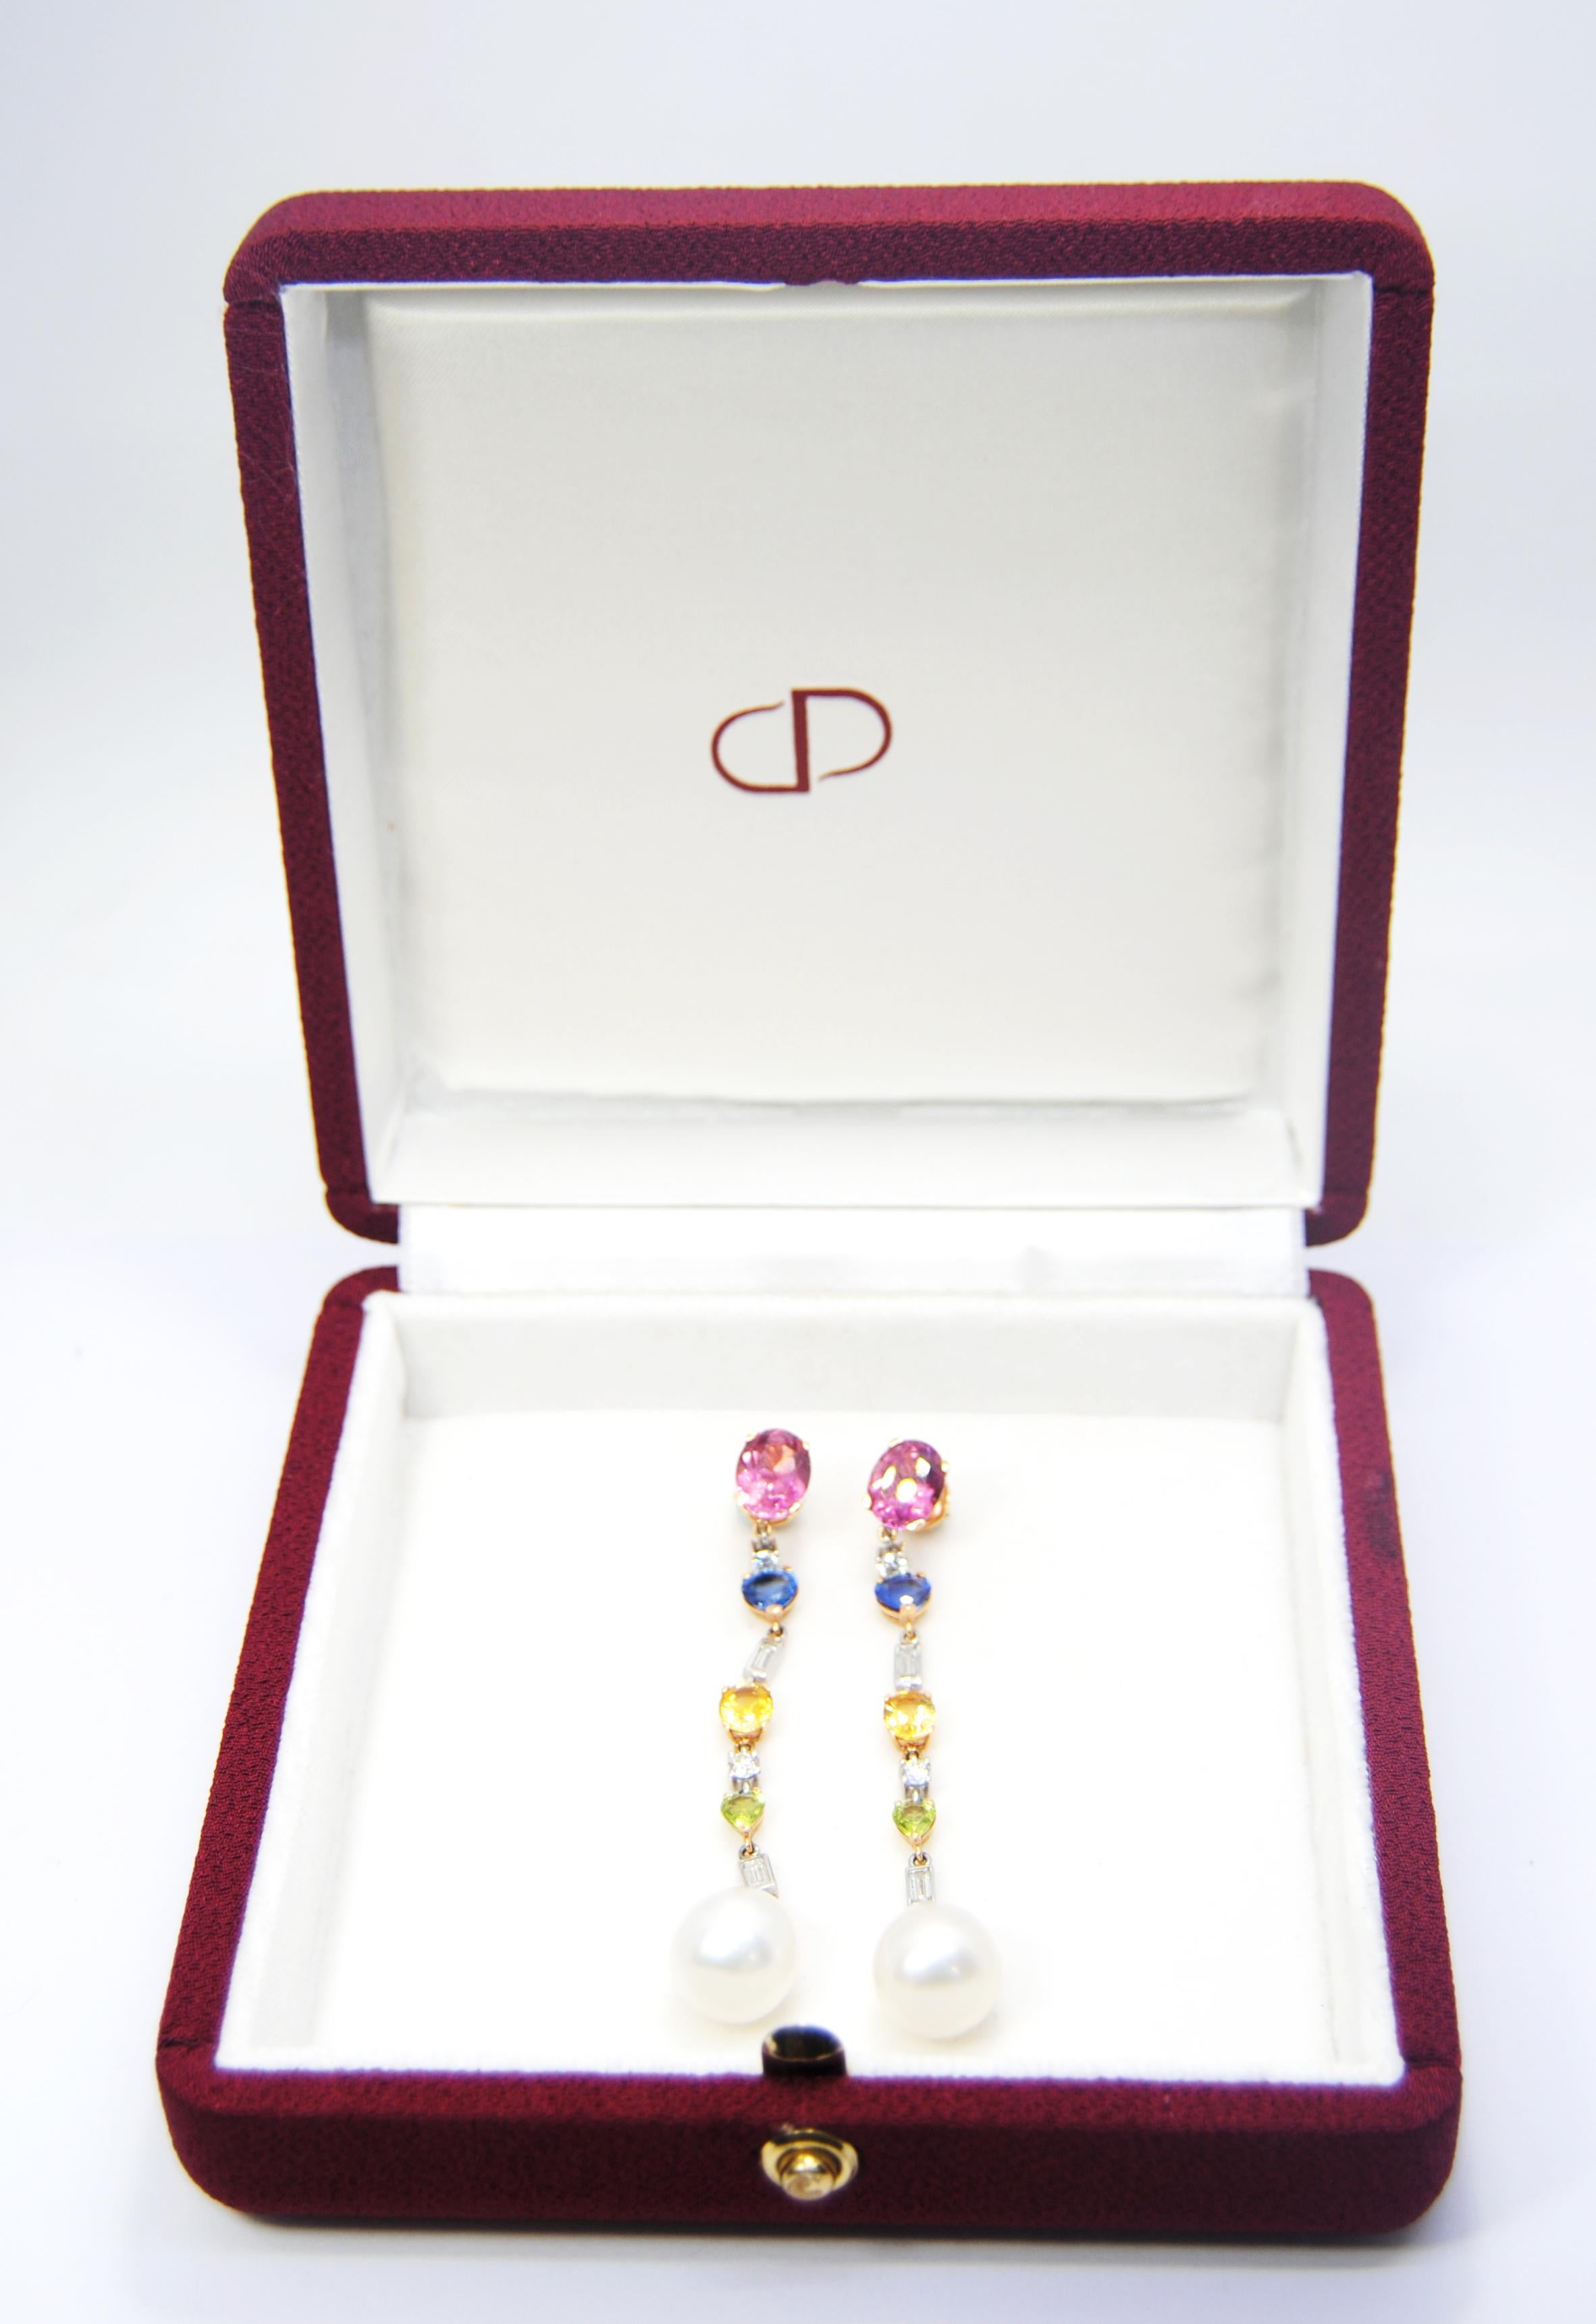 Chandelier Souths Sea Pearl Earrings in 18kt Gold Diamonds and Precious Gems In Excellent Condition For Sale In Bilbao, ES